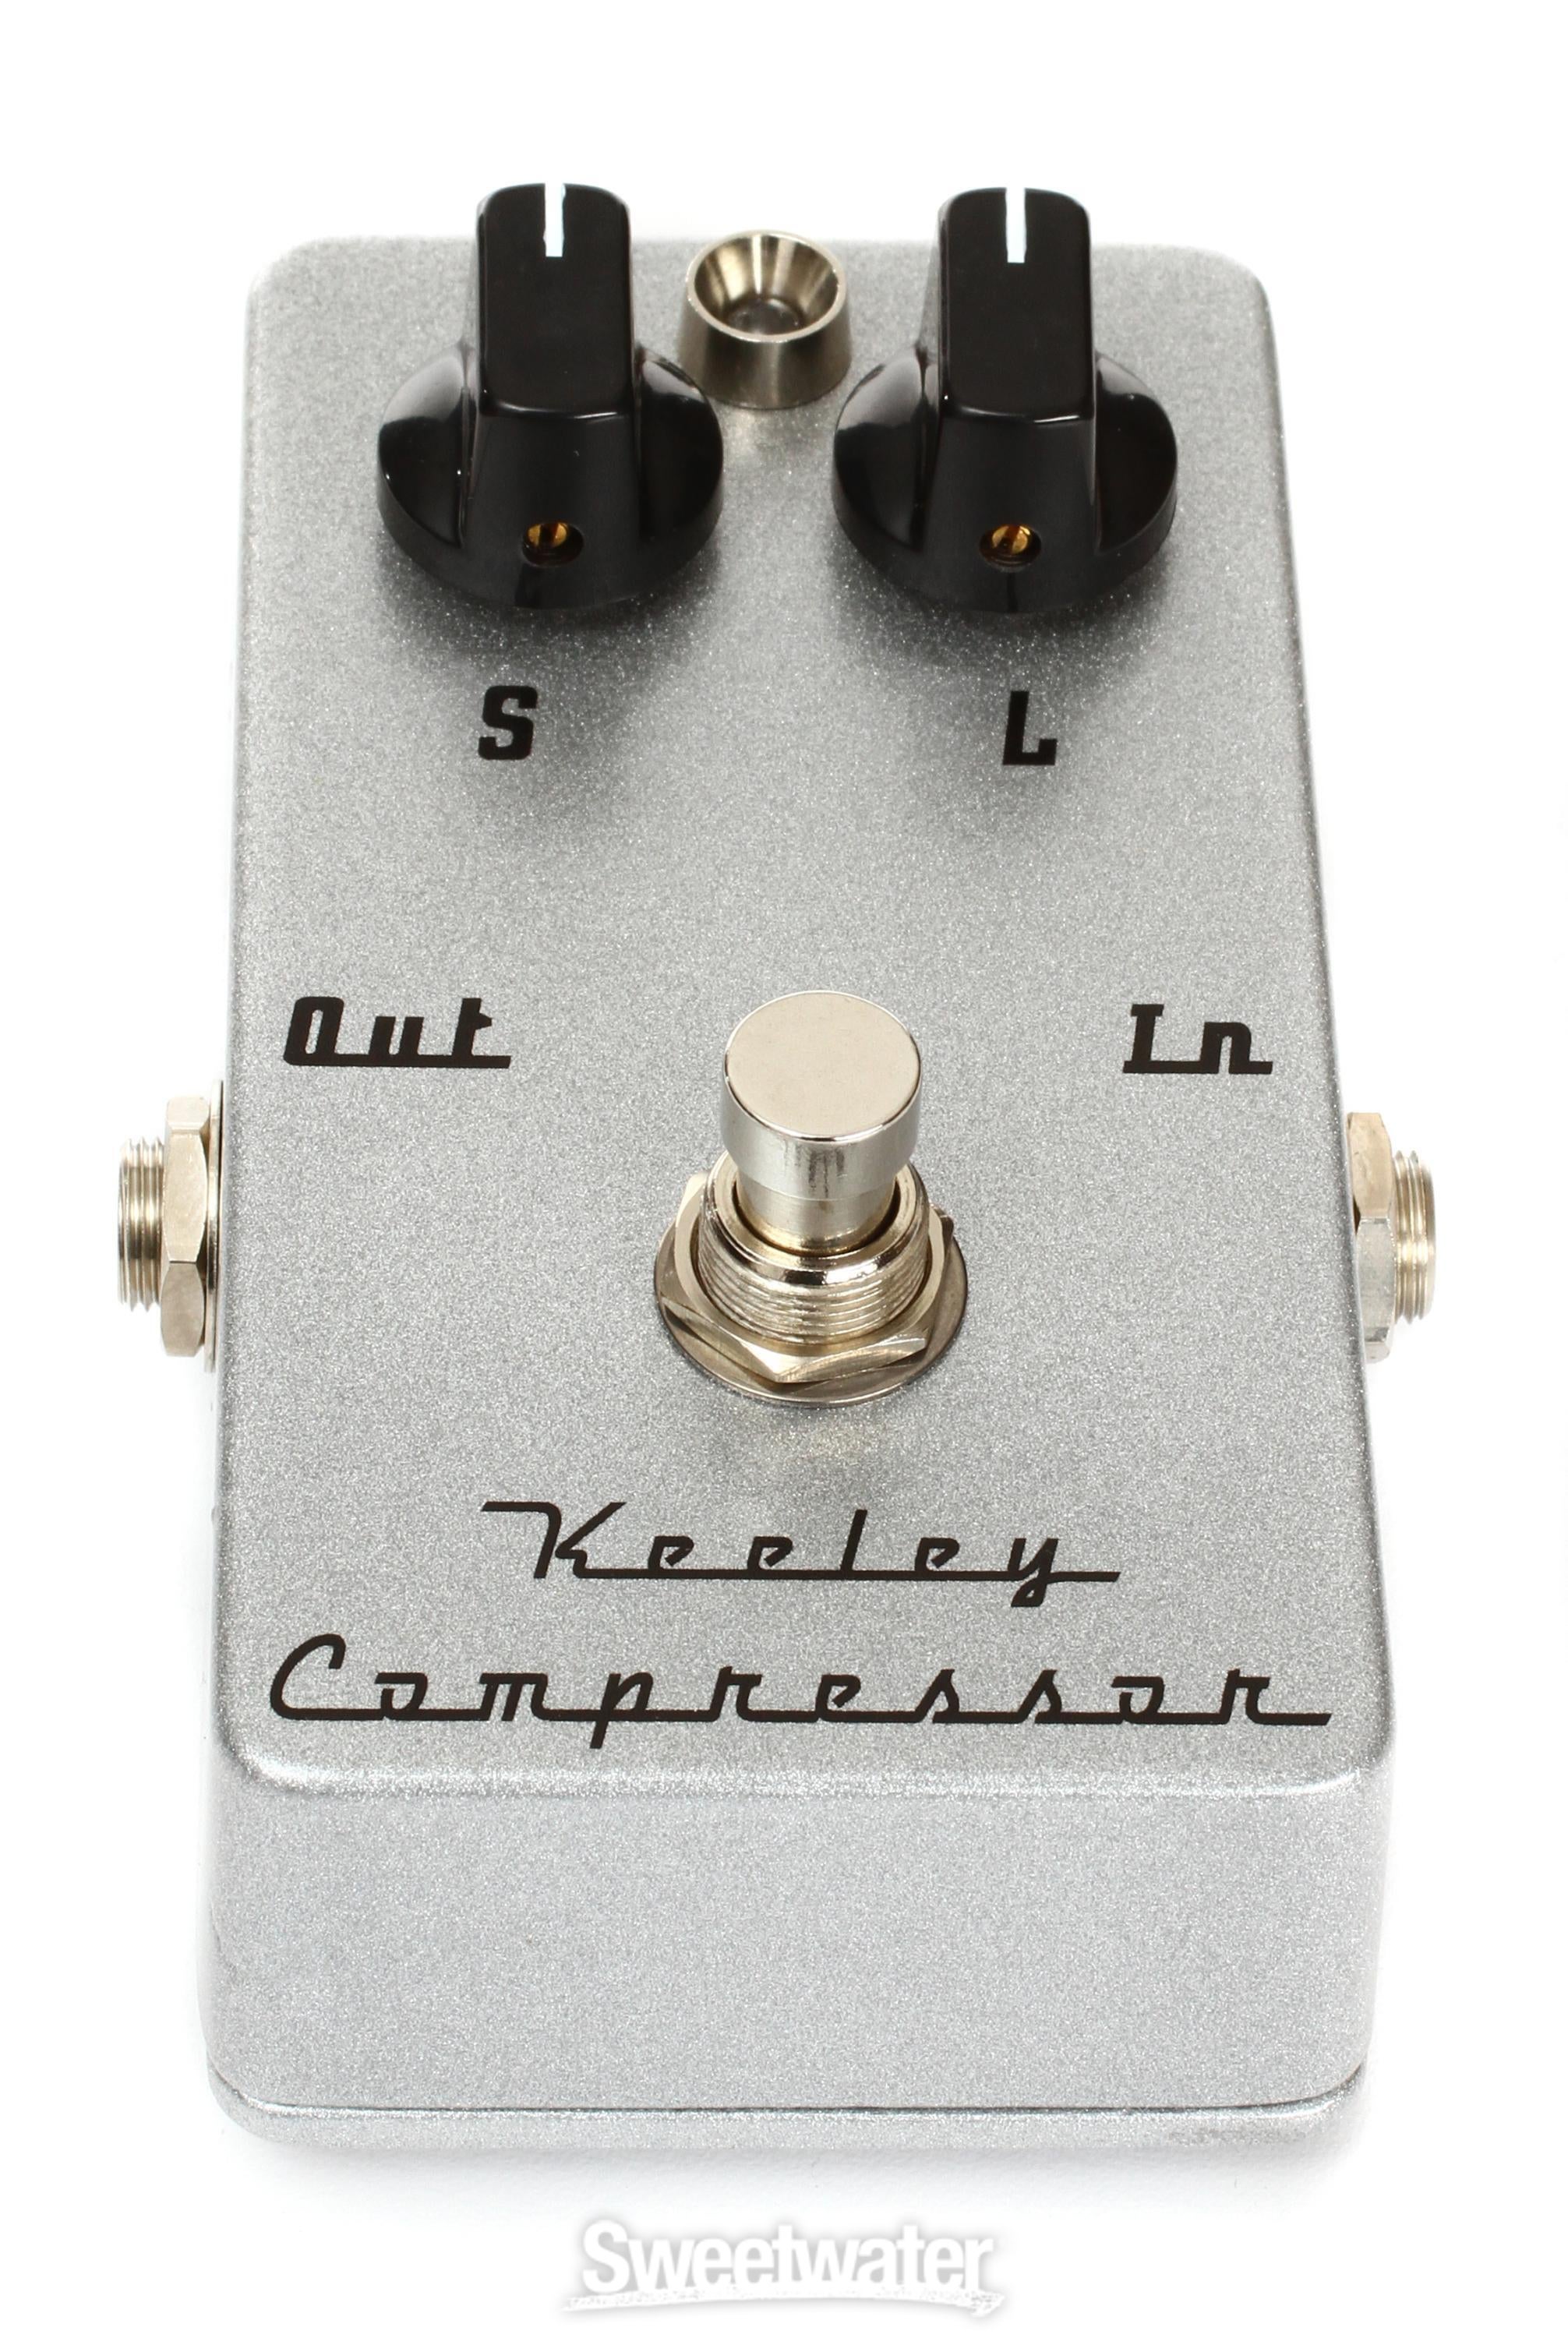 Keeley 2-knob Compressor Pedal Reviews | Sweetwater